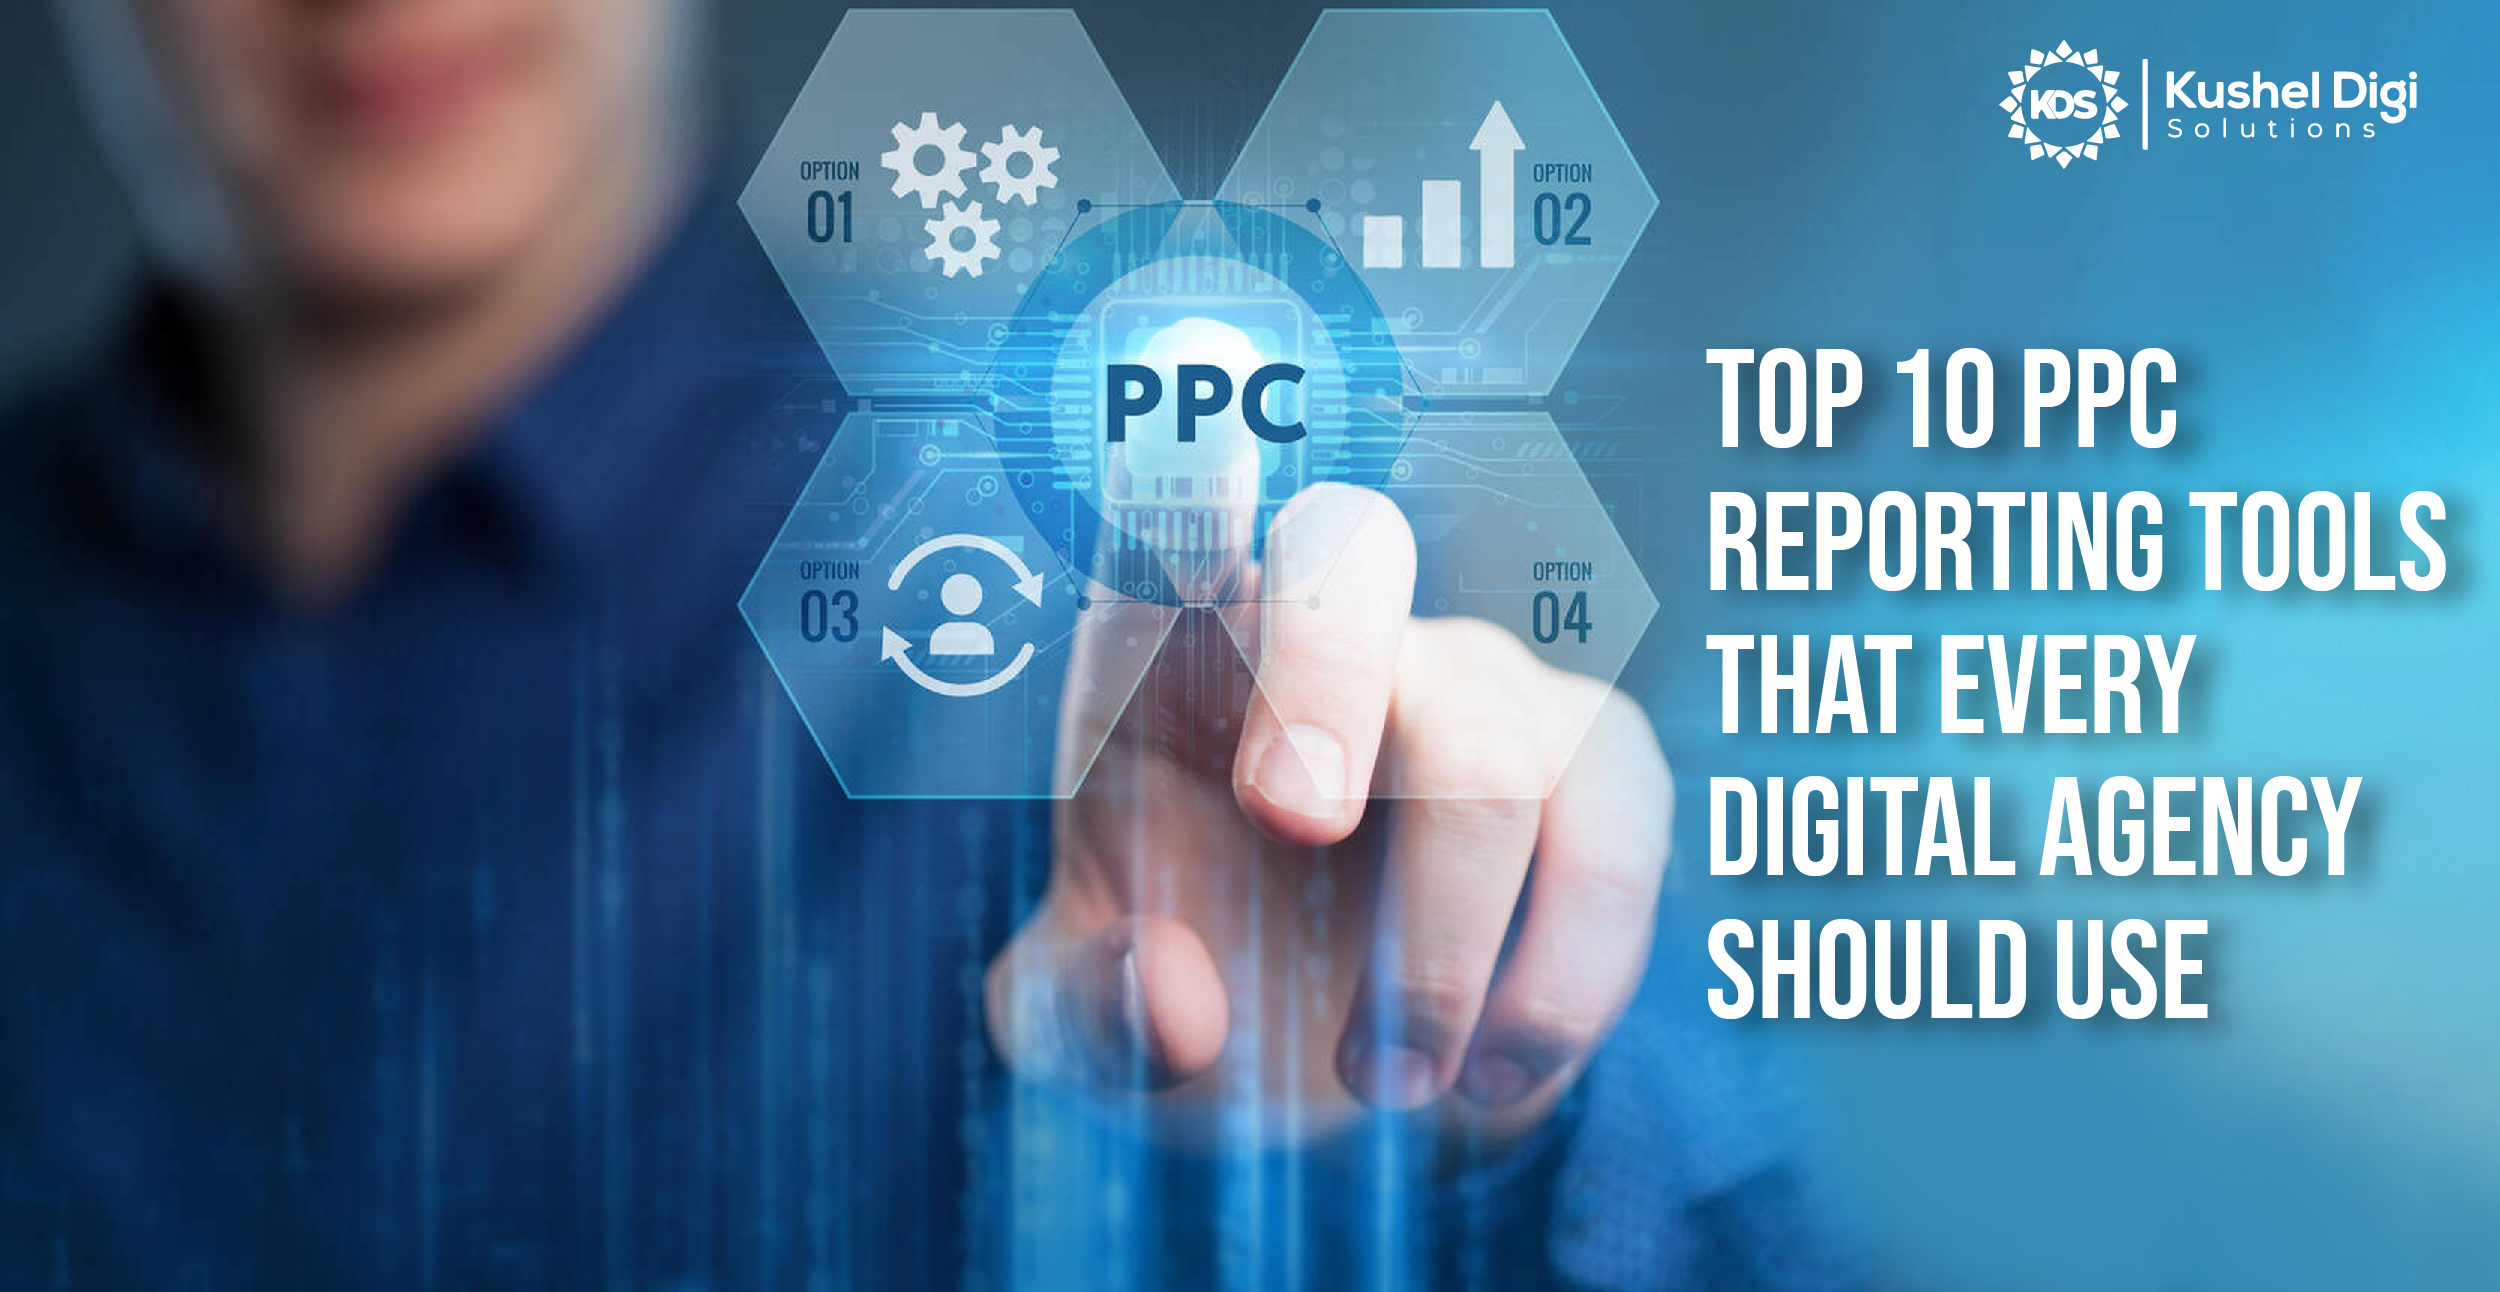 TOP 10 PPC REPORTING TOOLS EVERY DIGITAL AGENCY SHOULD USE